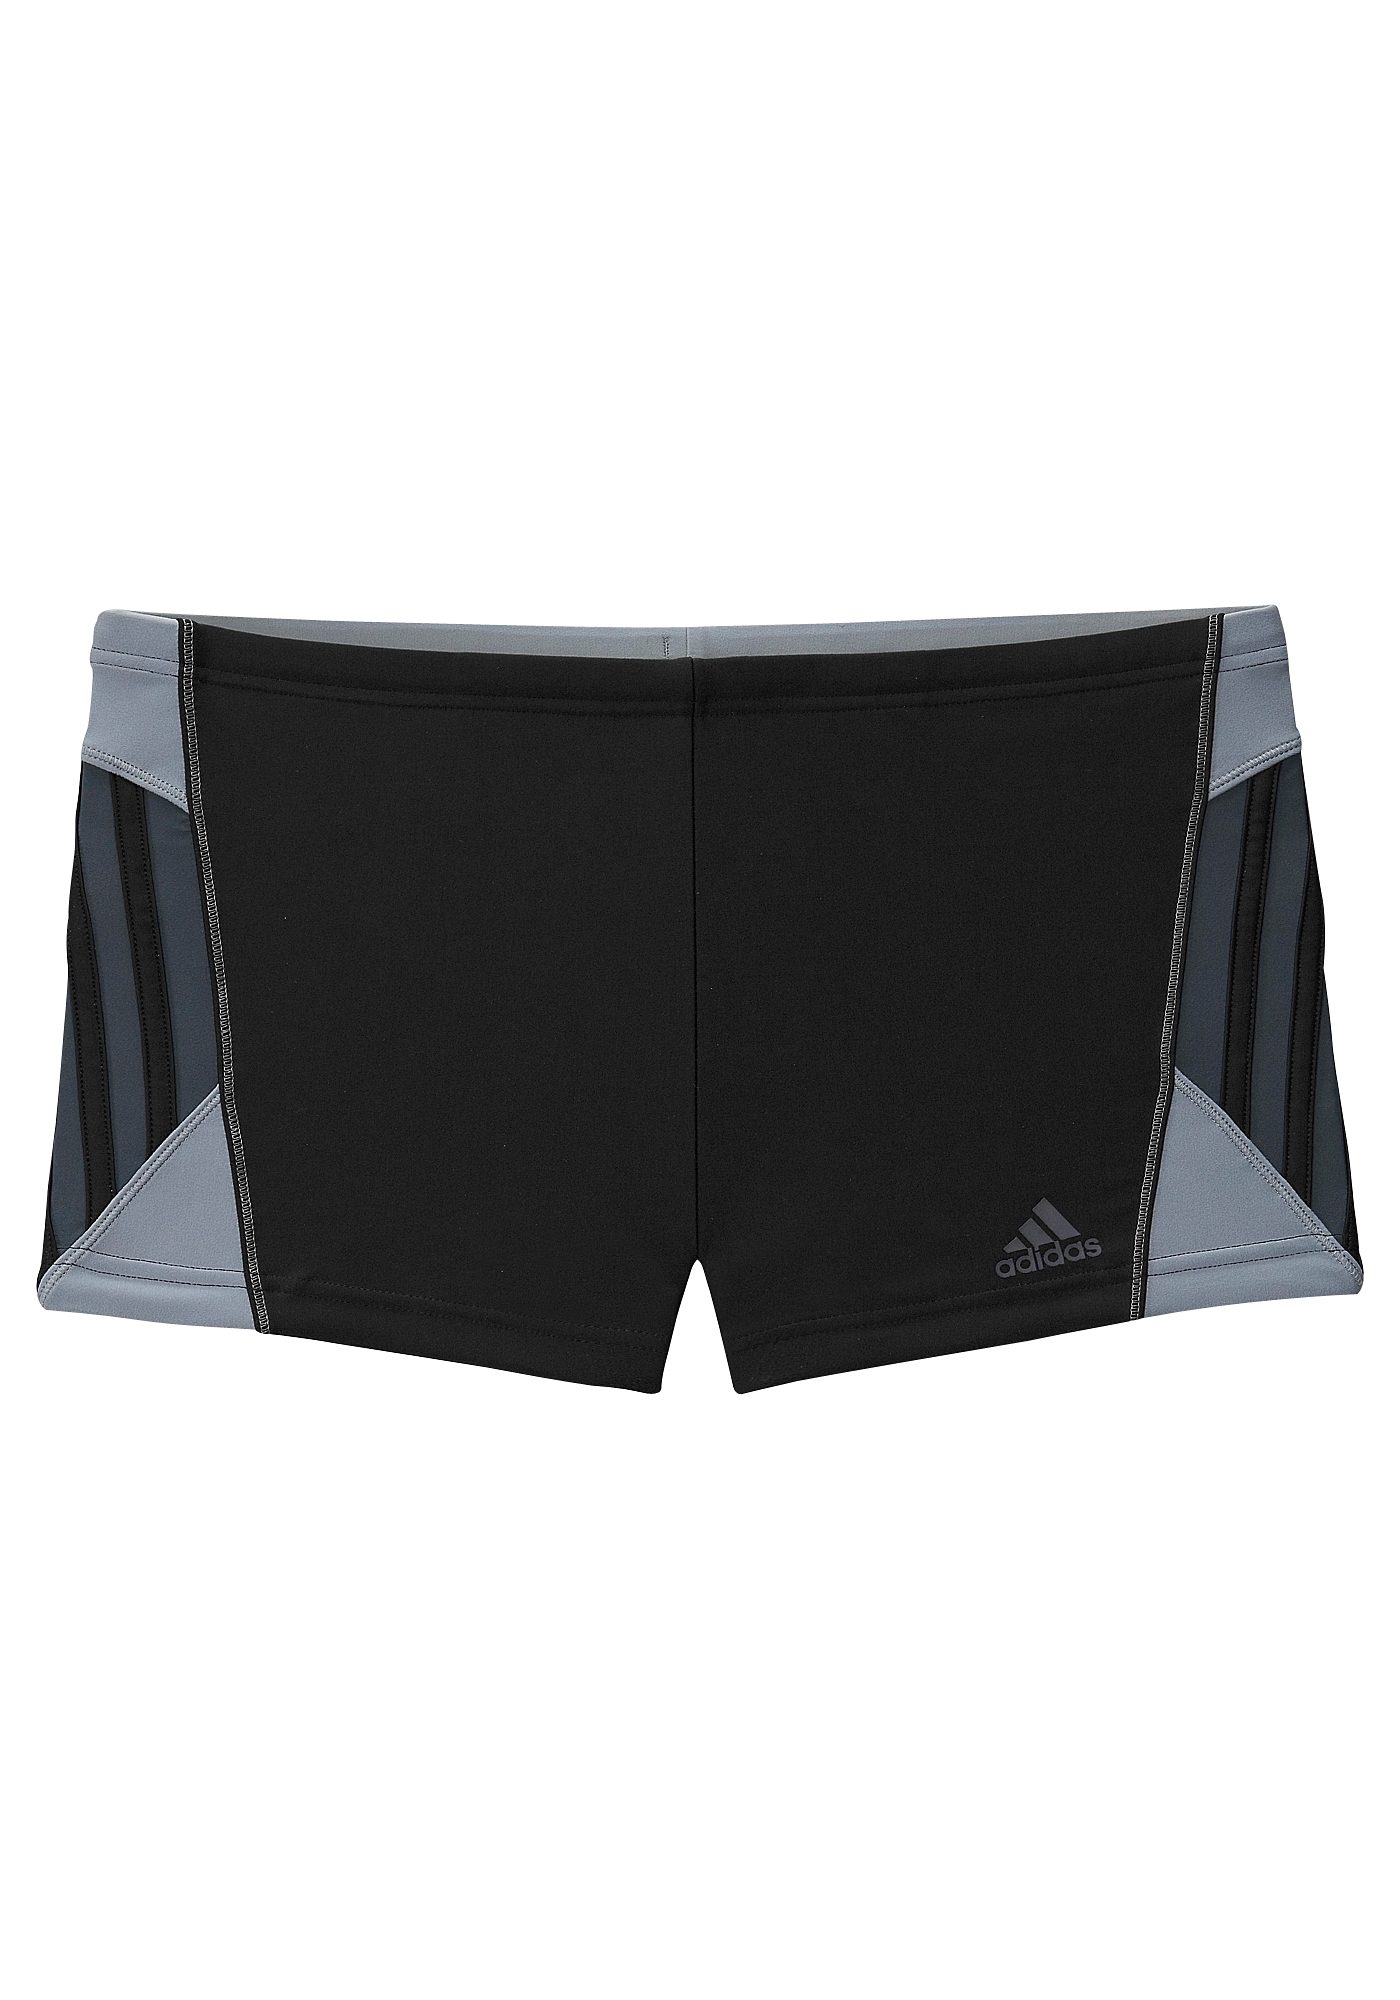 Otto - adidas Performance NU 15% KORTING: adidas Performance Zwemboxer in 3-strepen-look